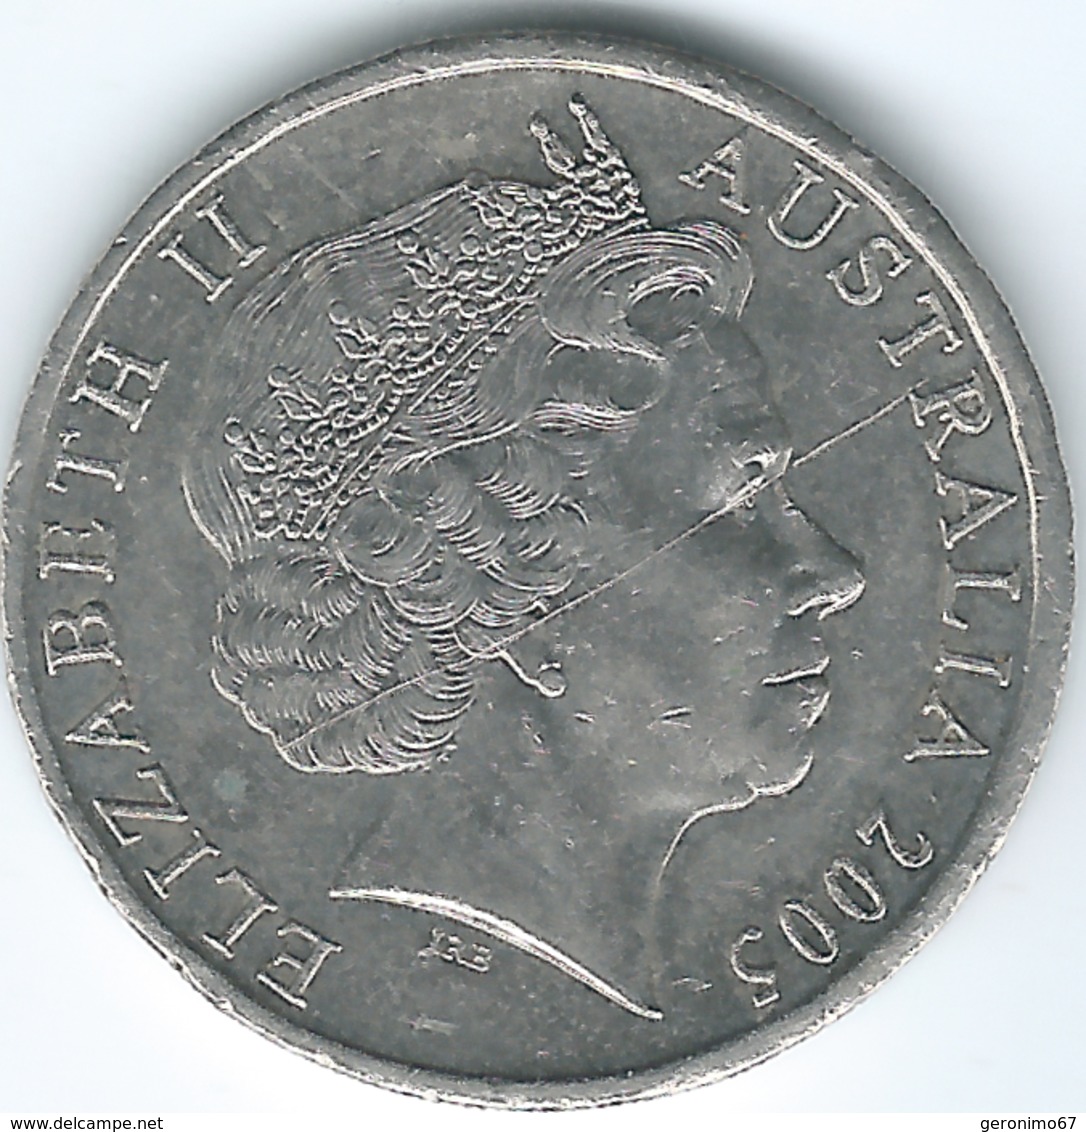 Australia - Elizabeth II - 20 Cents - 2005 - 60th Anniversary Of The End Of WWII - KM745 - 20 Cents